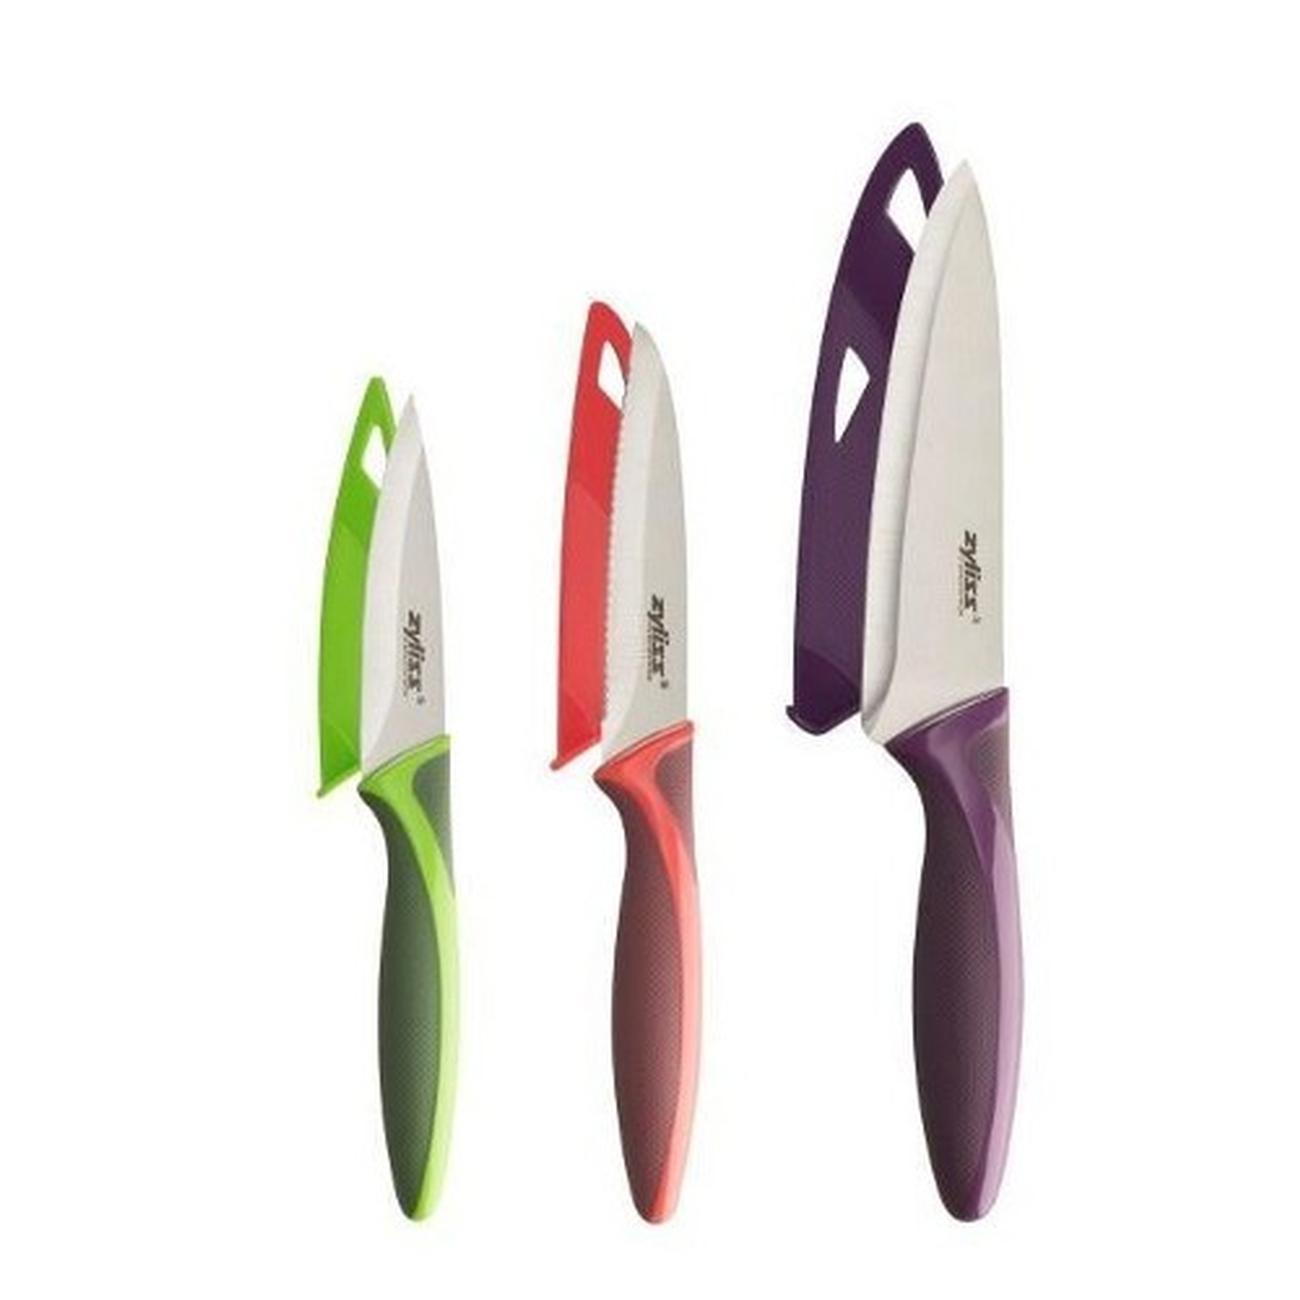 https://www.thekitchenwhisk.ie/contentfiles/productImages/Large/KnifeSet3pc1.jpg